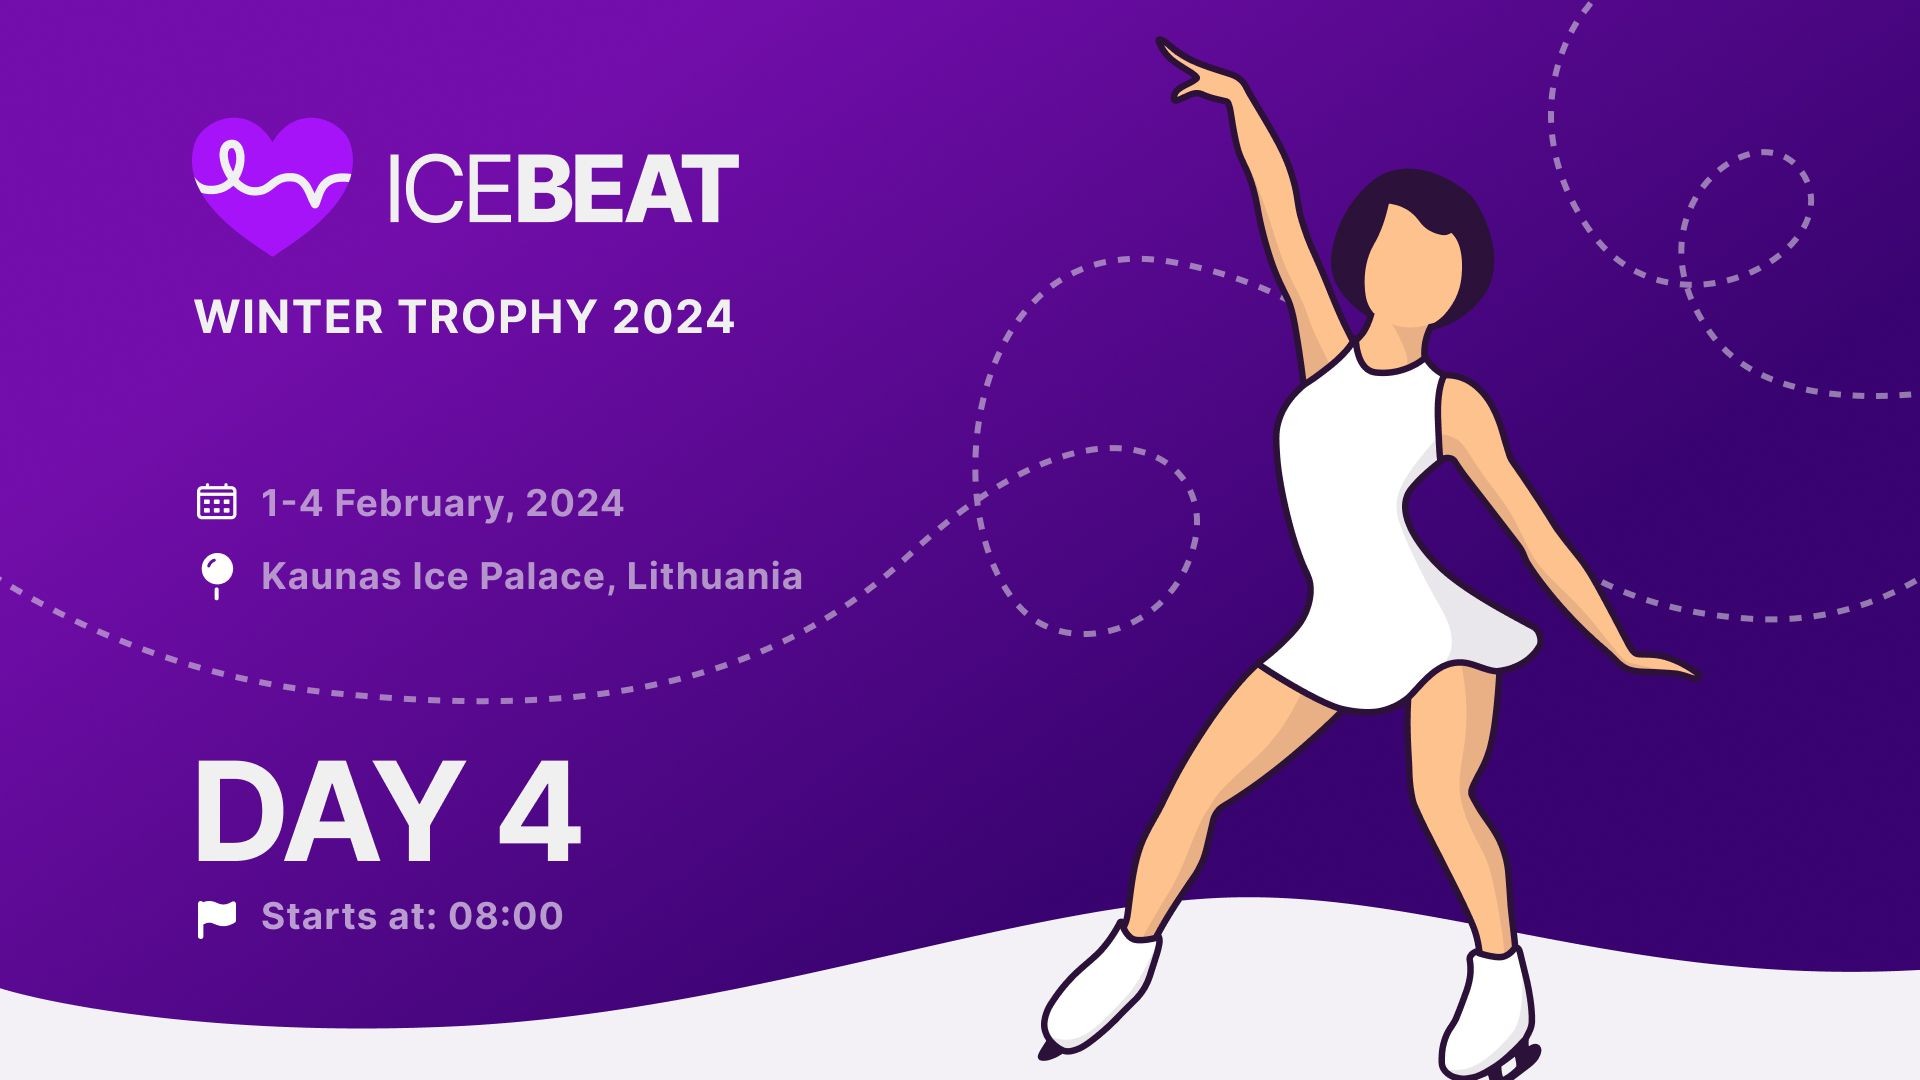 DAY 4 - ICEBEAT WINTER TROPHY 2024